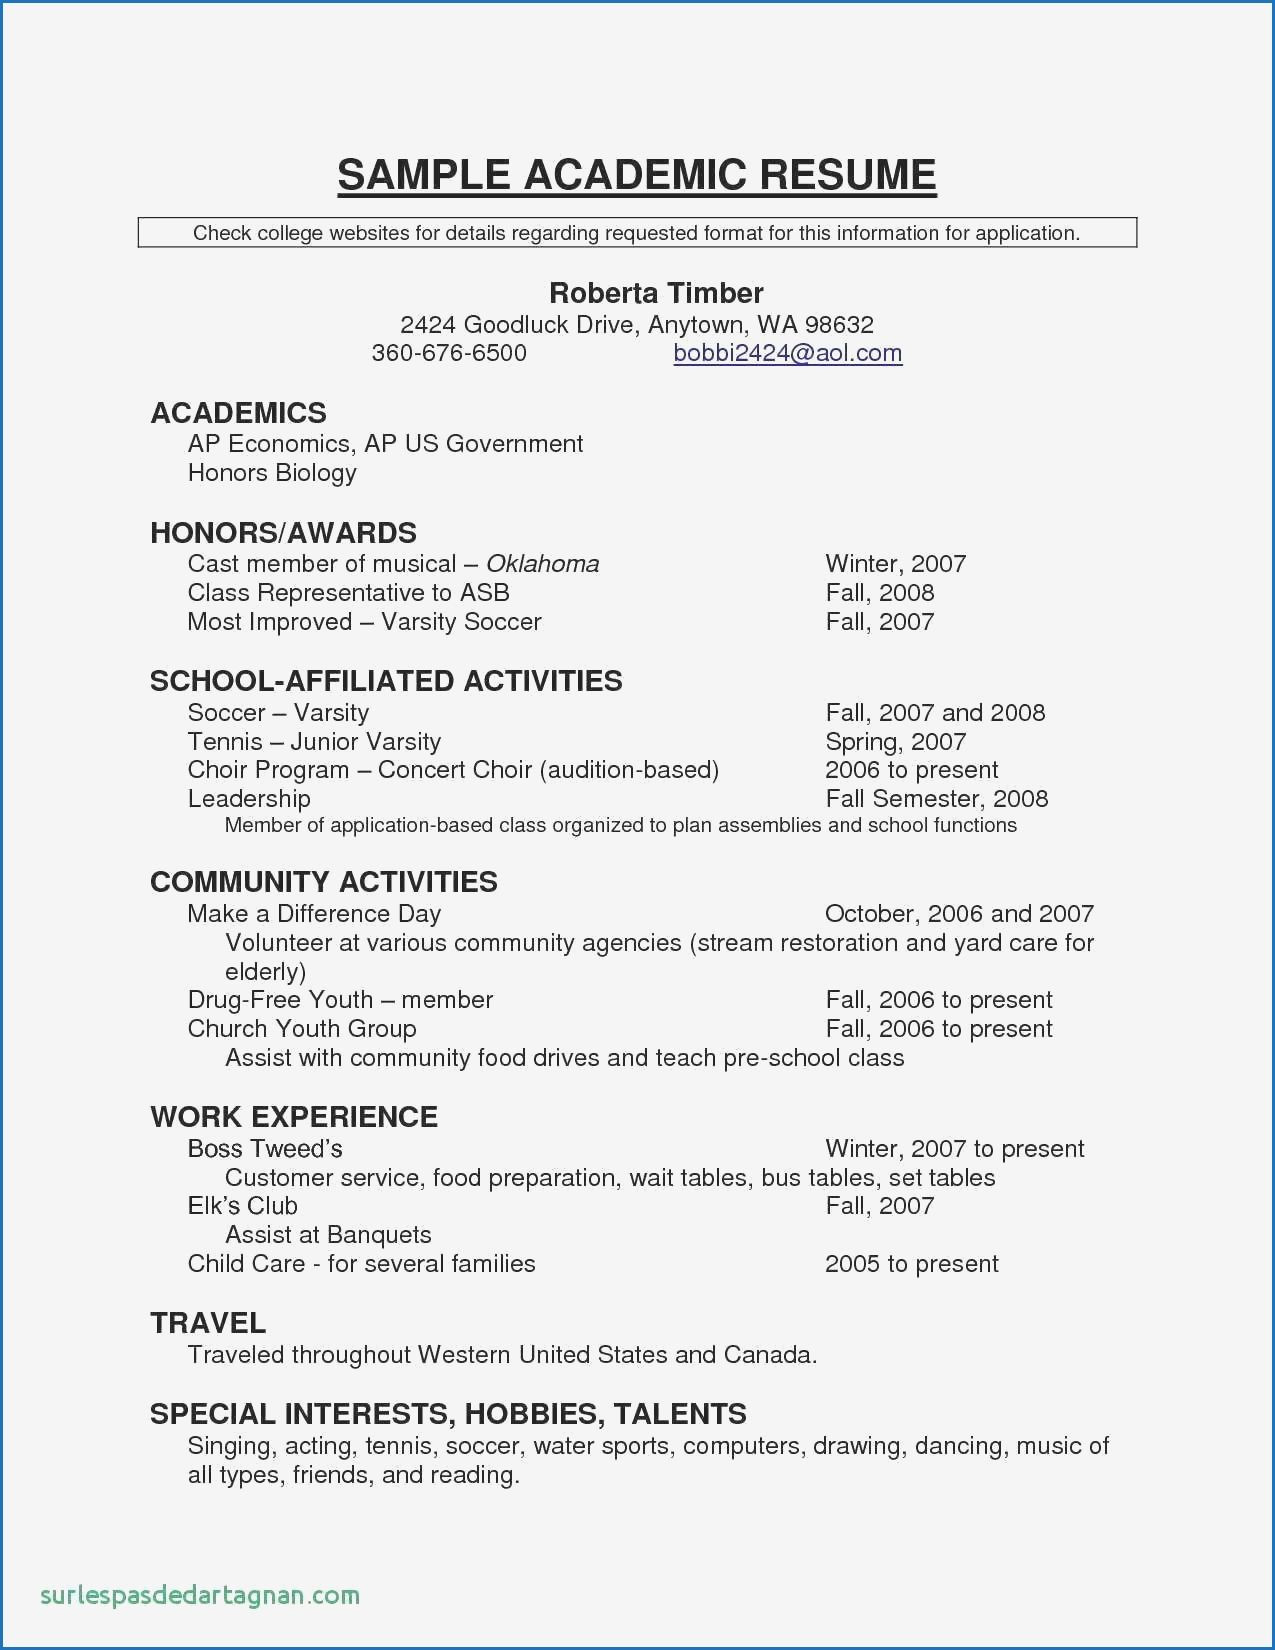 Sample Honors and Awards On Resume 11 Government It Resume Examples Check More at Https://www.ortelle …